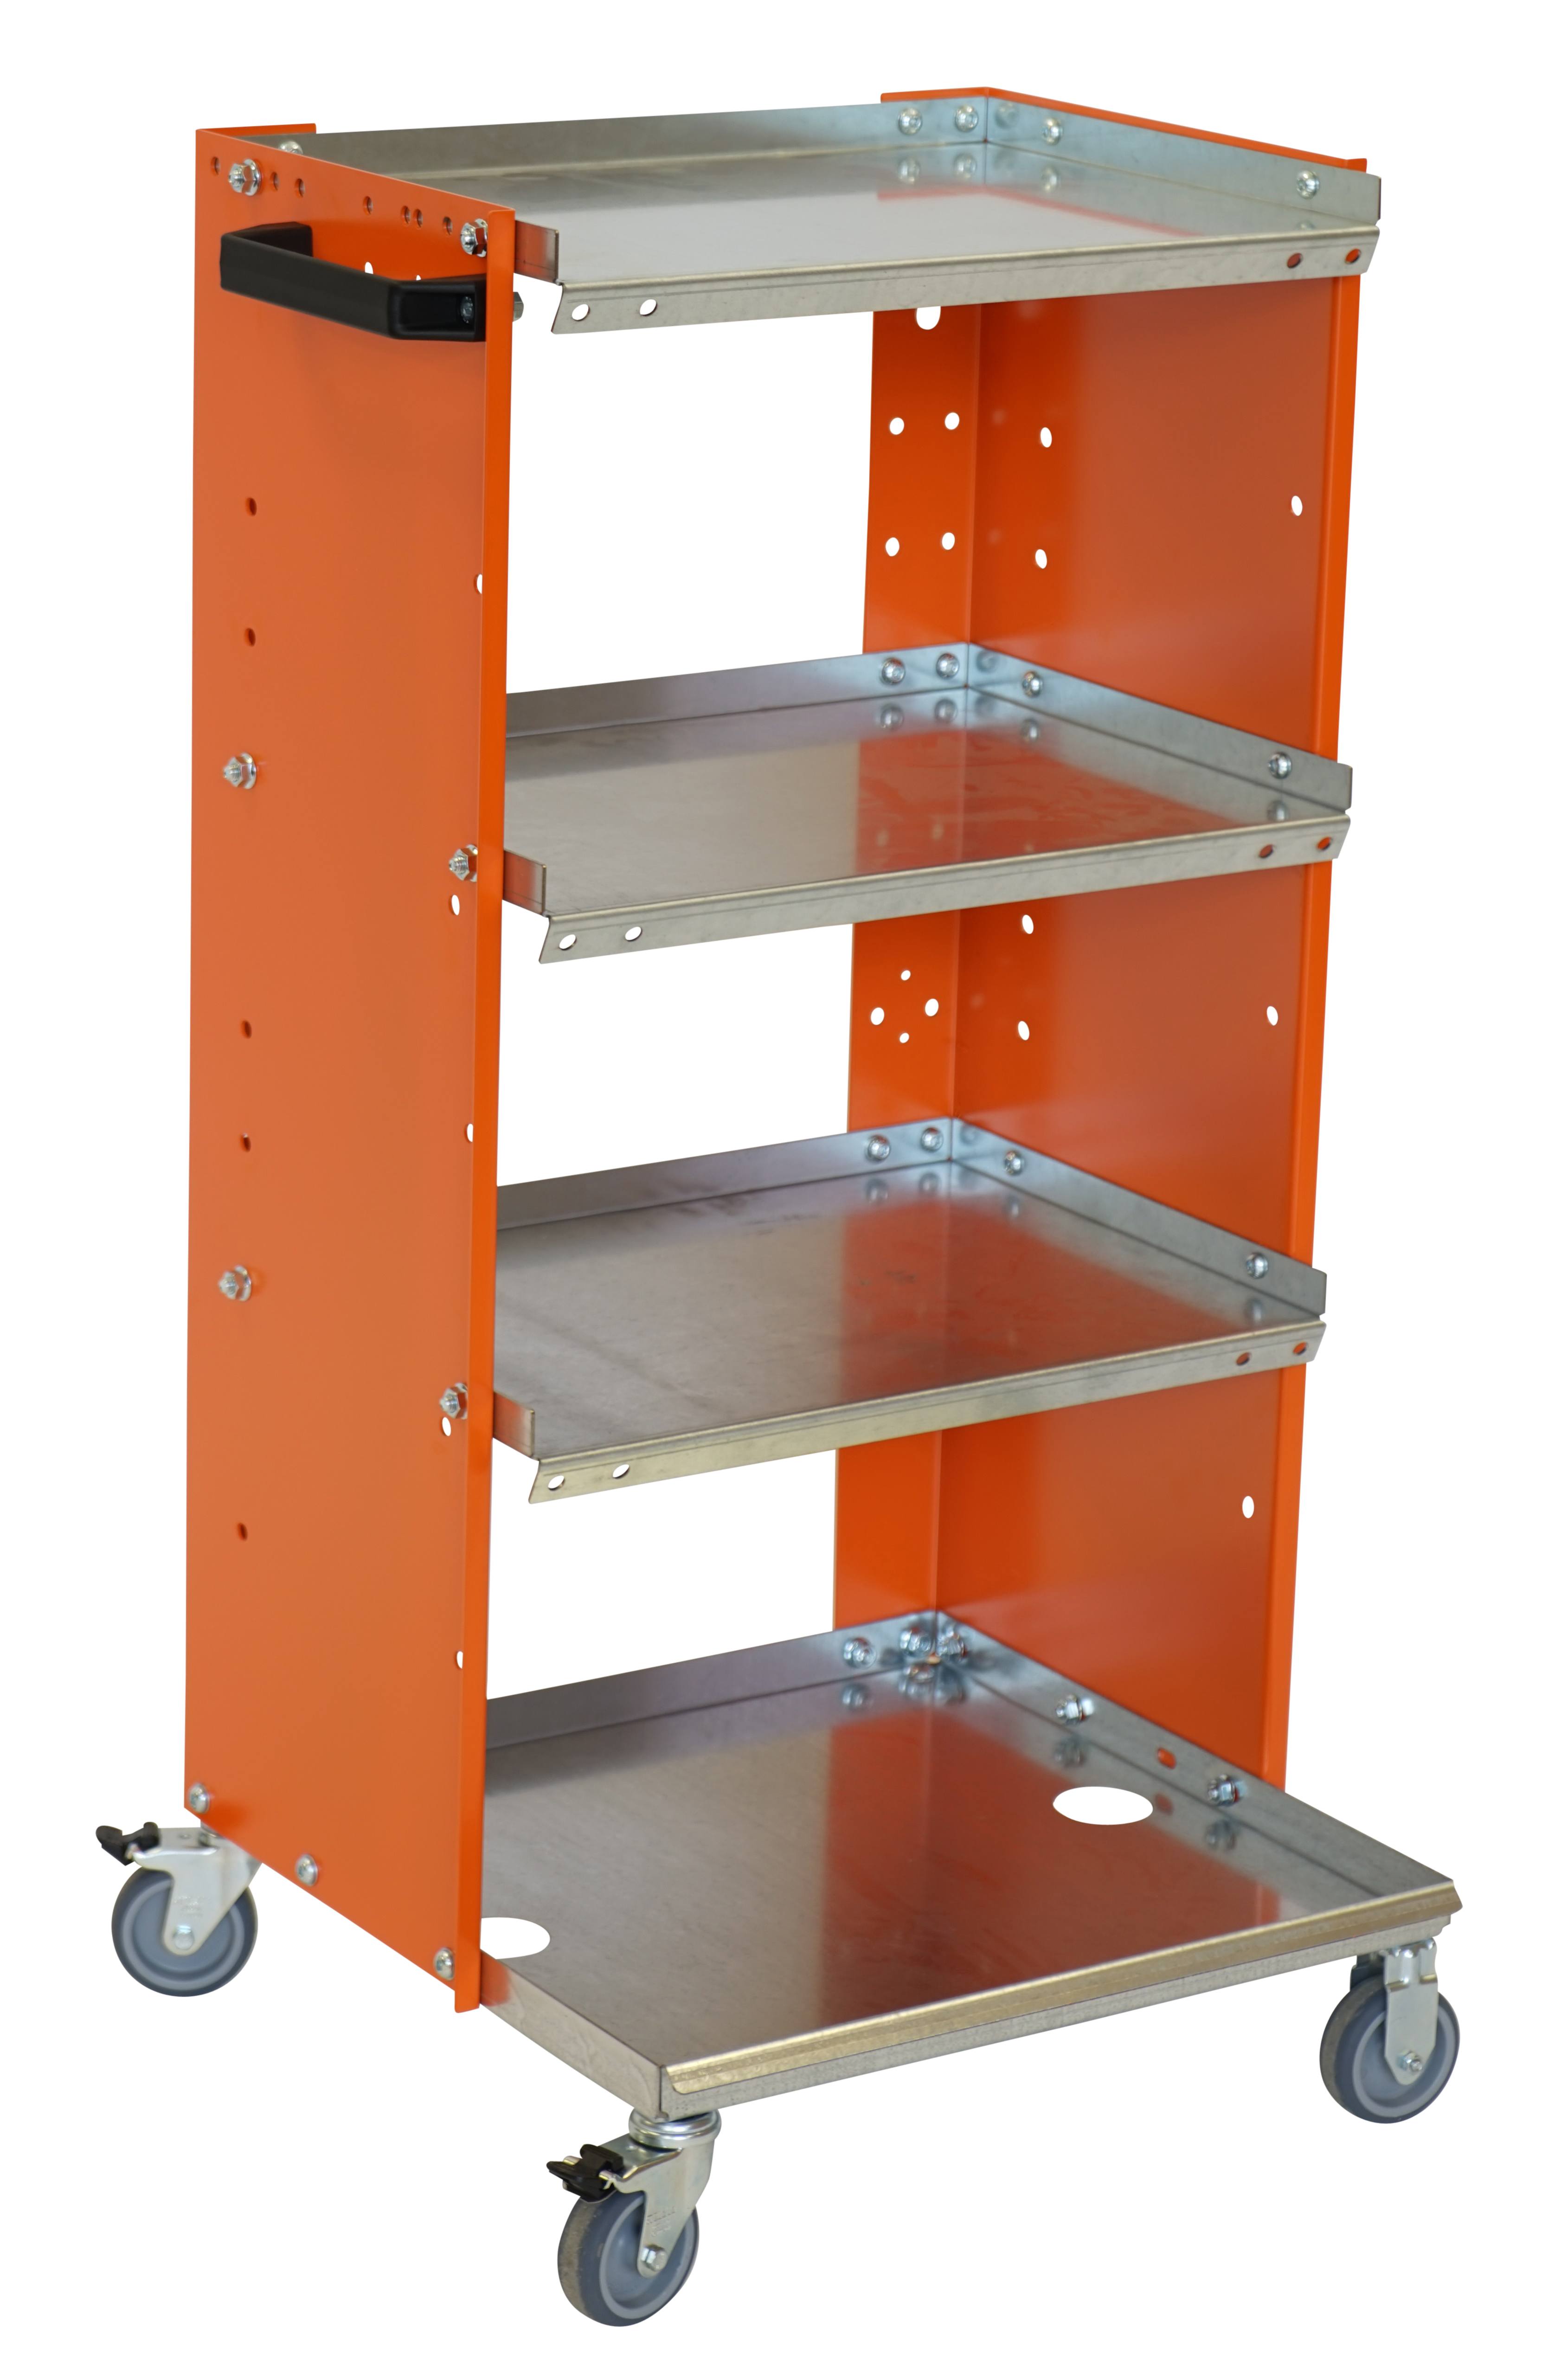 BSW 460 supply trolley